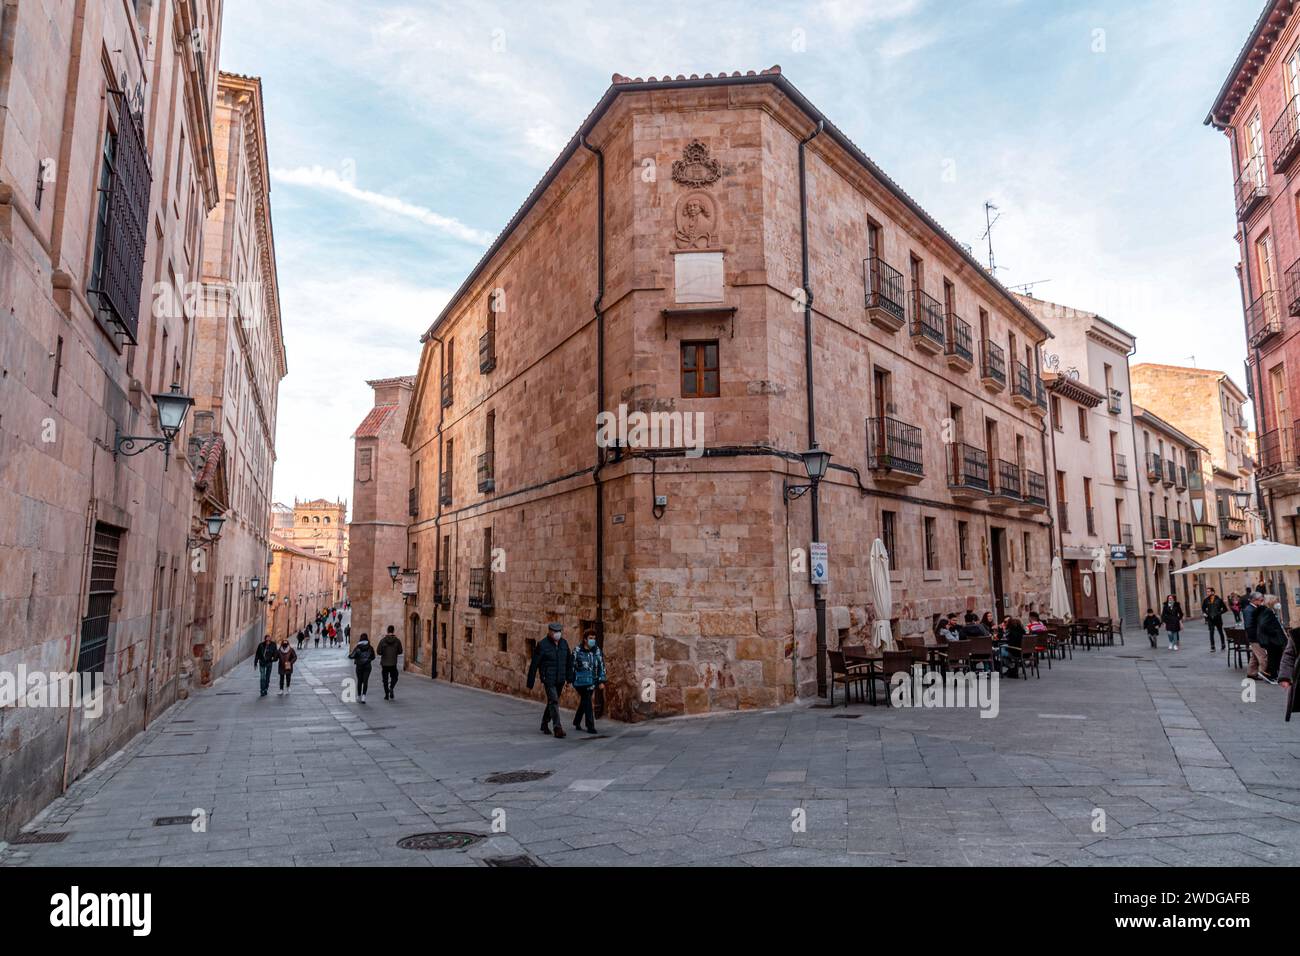 Salamanca, Spain-FEB 20, 2022: Generic architecture and street view from Salamanca, a historical city in Castile and Leon region of Spain. Stock Photo